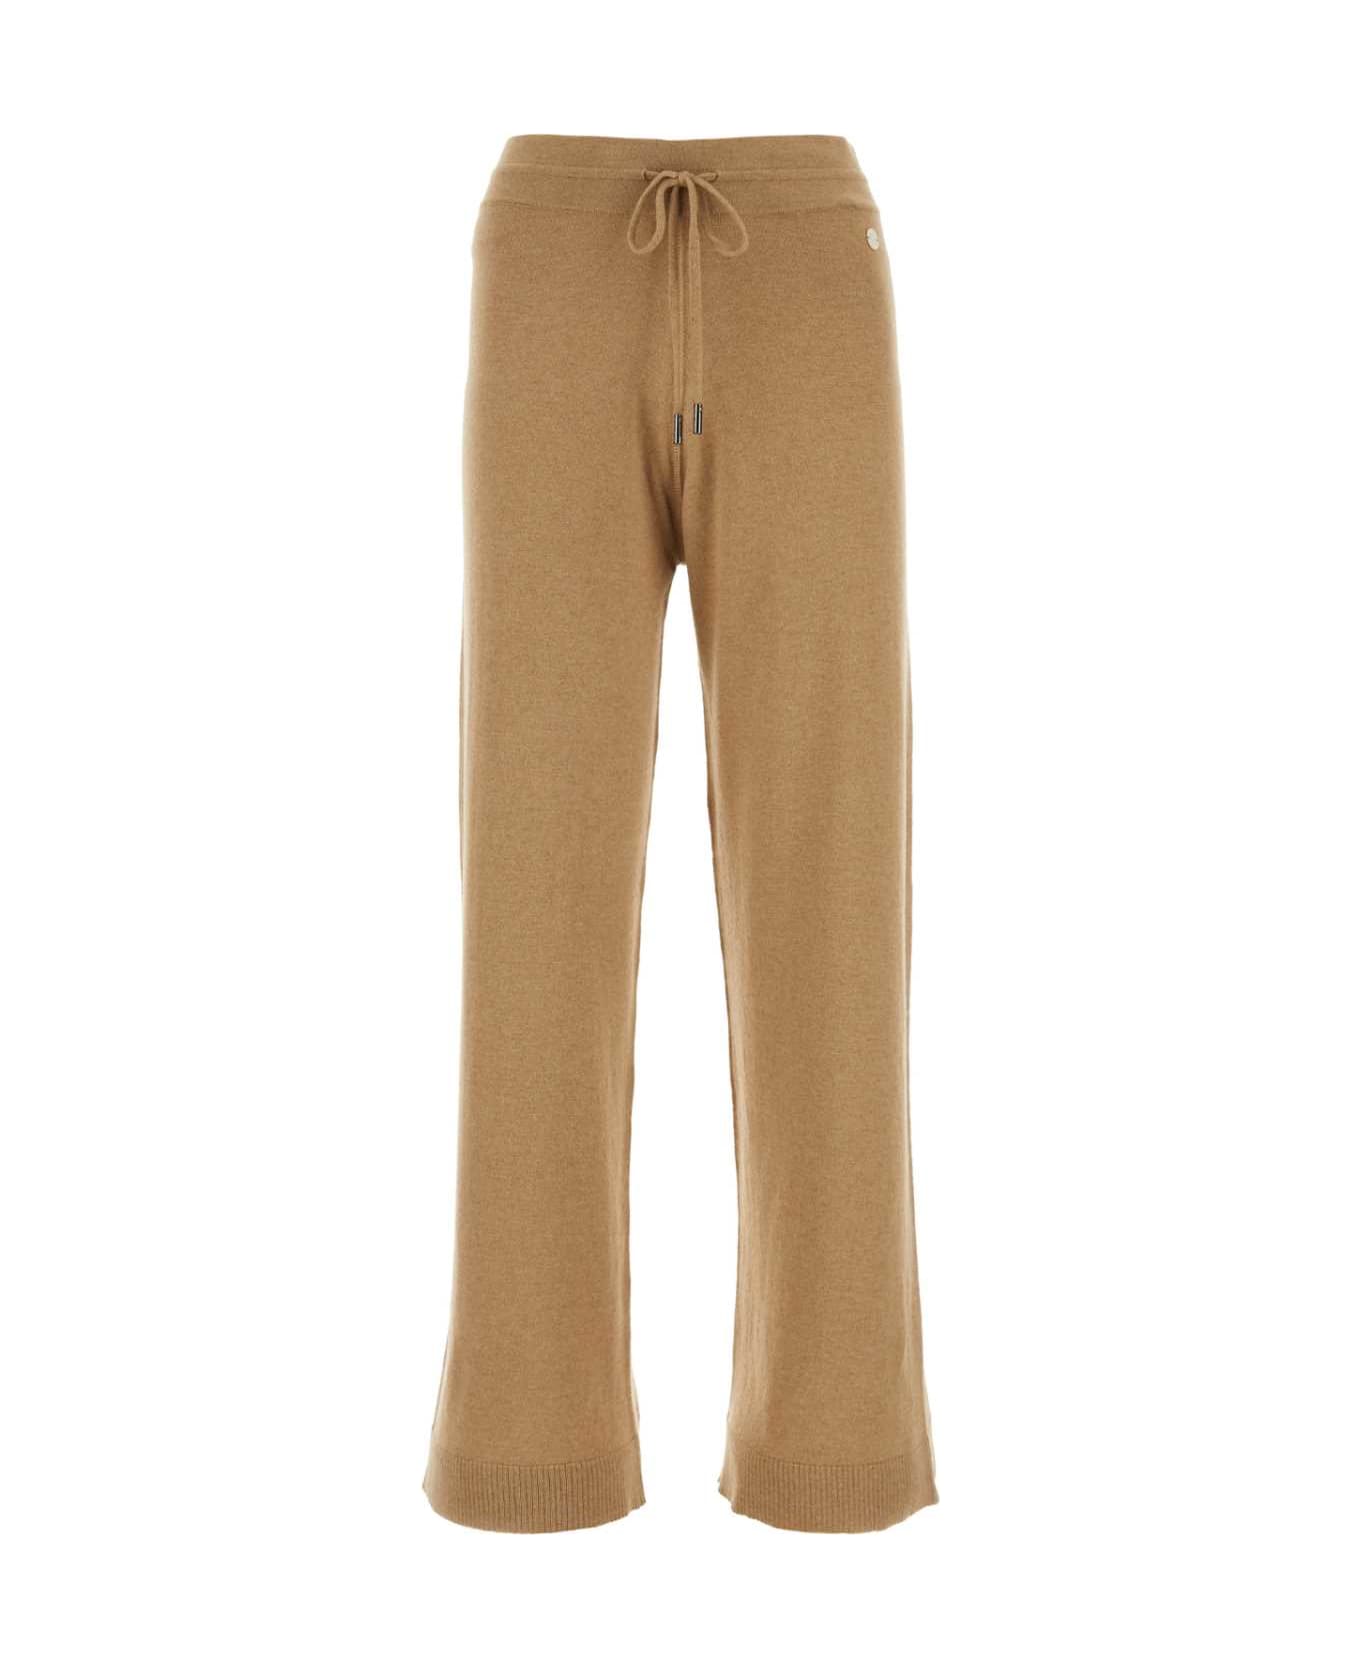 Woolrich Camel Nylon Blend Pant - SUEDEBROWN